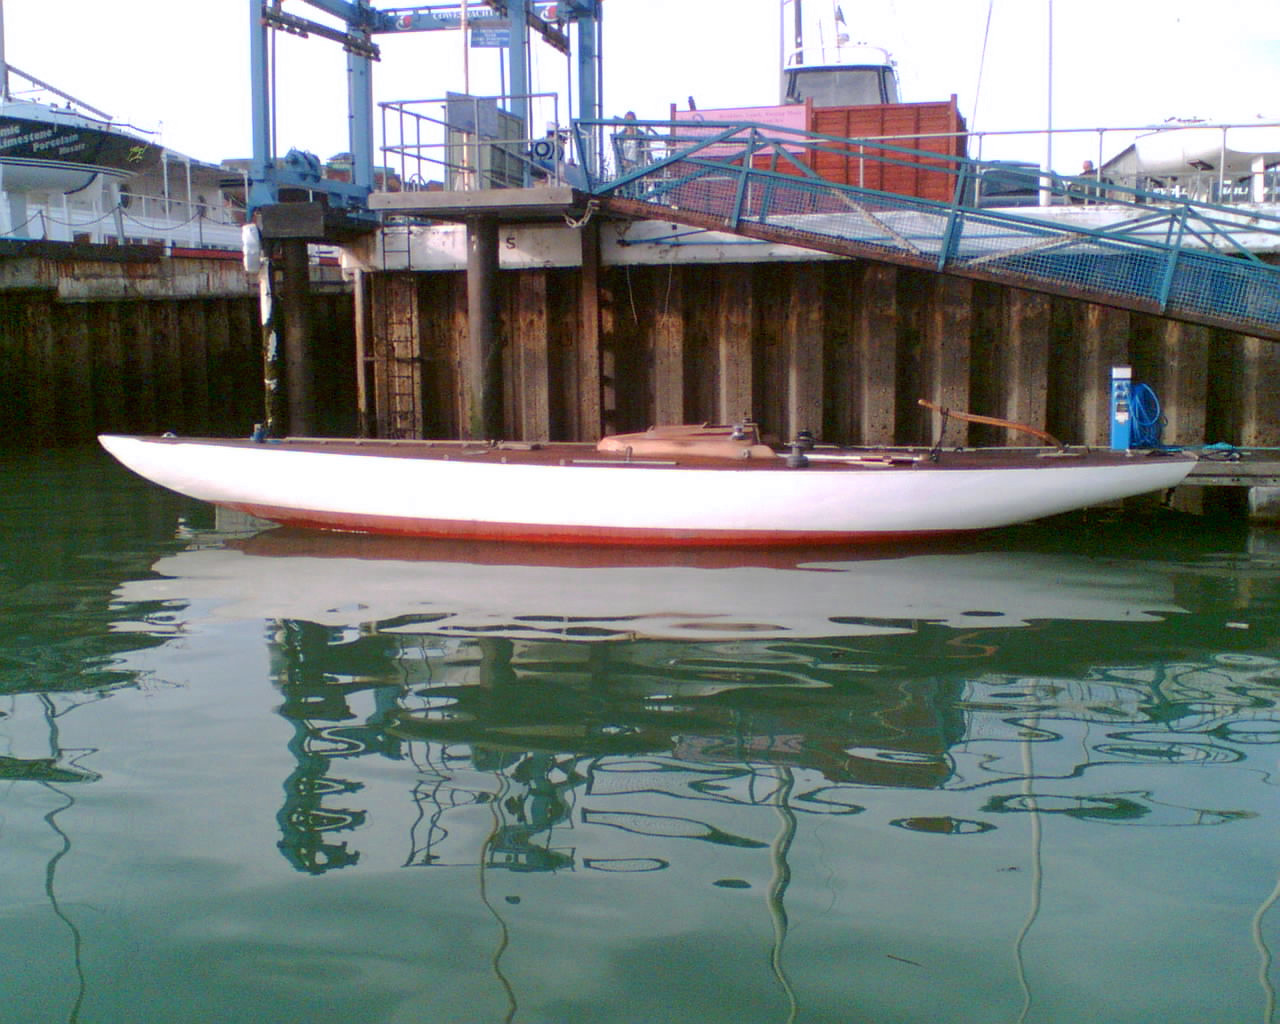 A red and white yacht hull moored